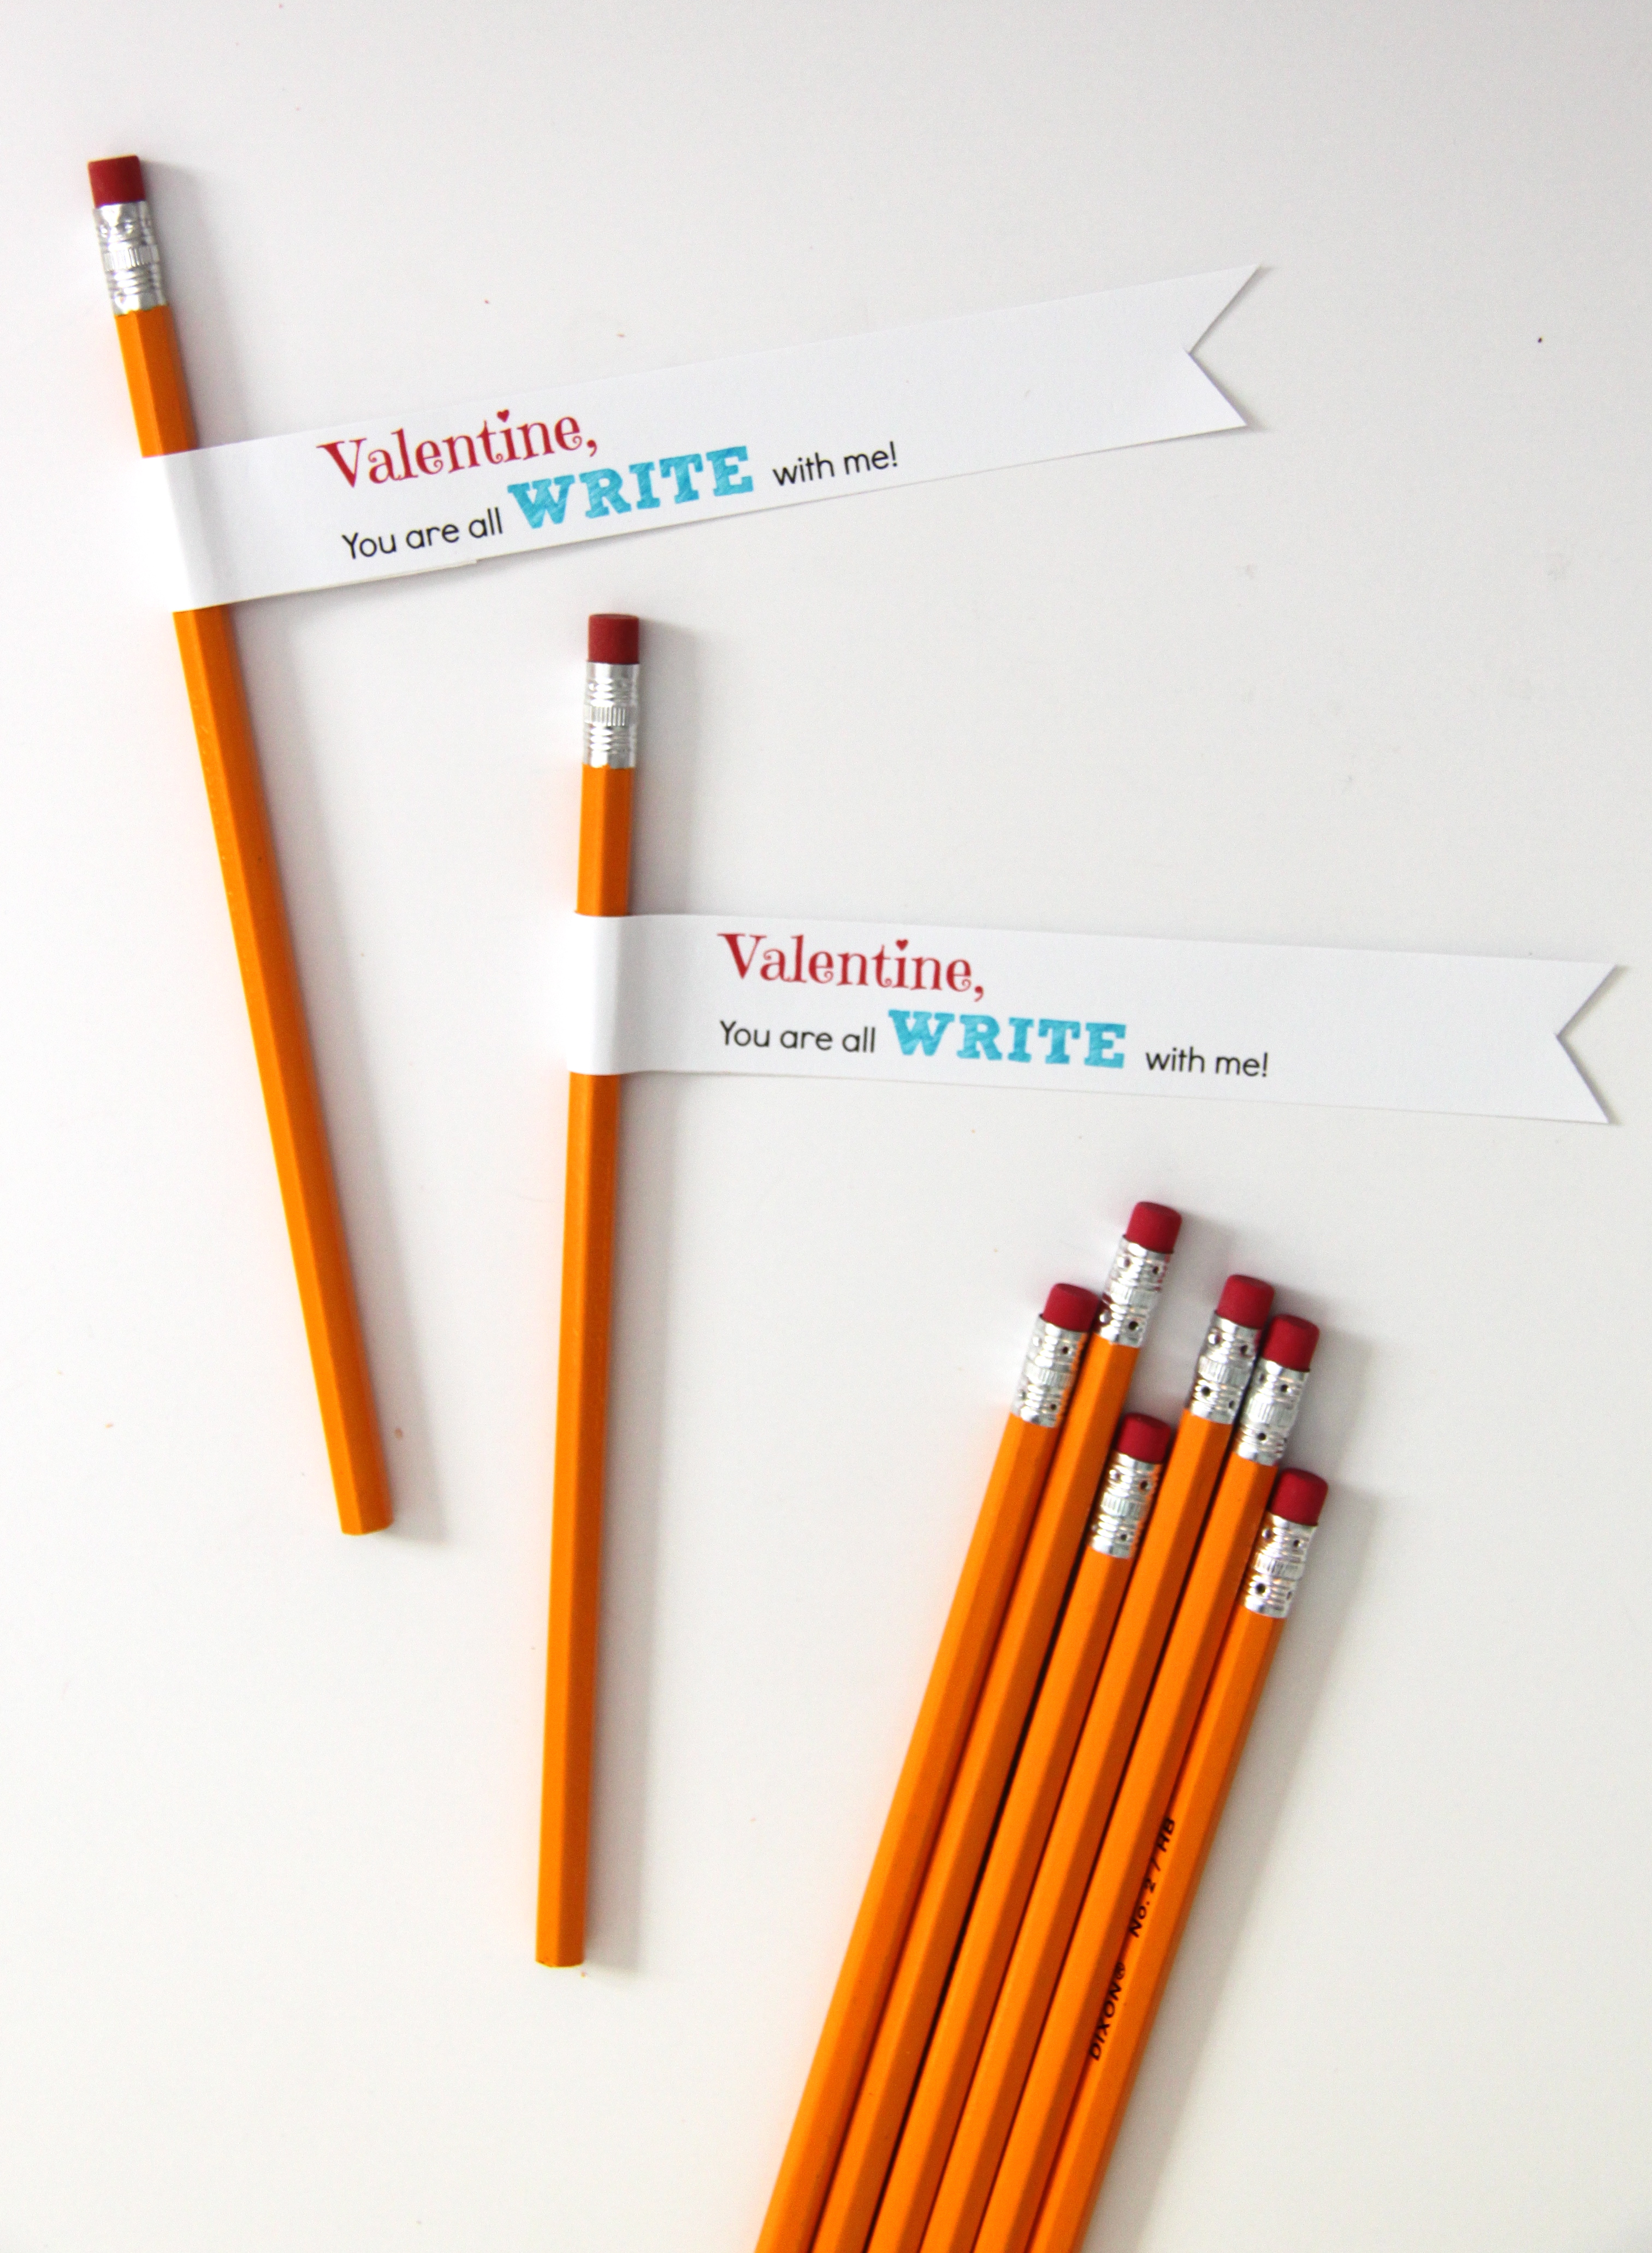 FREE Printable: Valentine, you are all WRITE with me - Smashed Peas & Carrots3025 x 4126